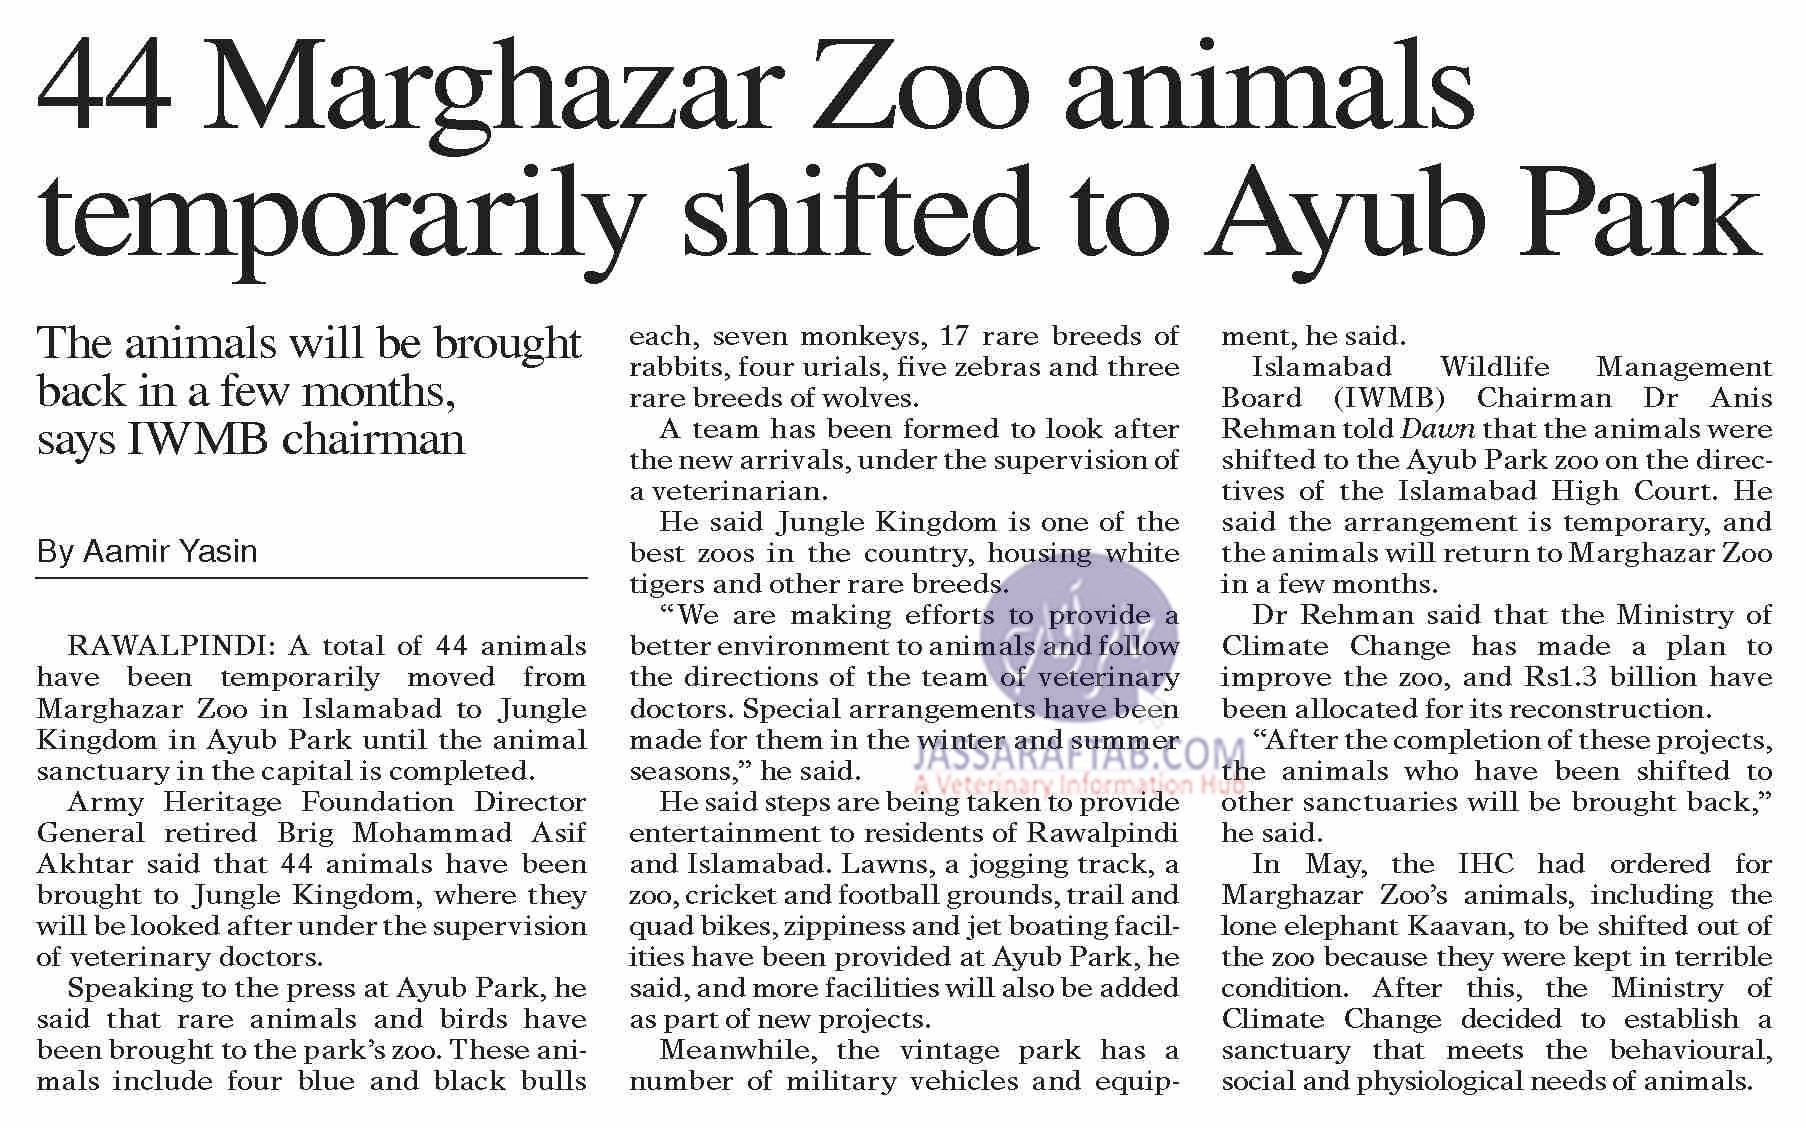 44 Marghazar Zoo animals temporarily shifted to Ayub National Park 